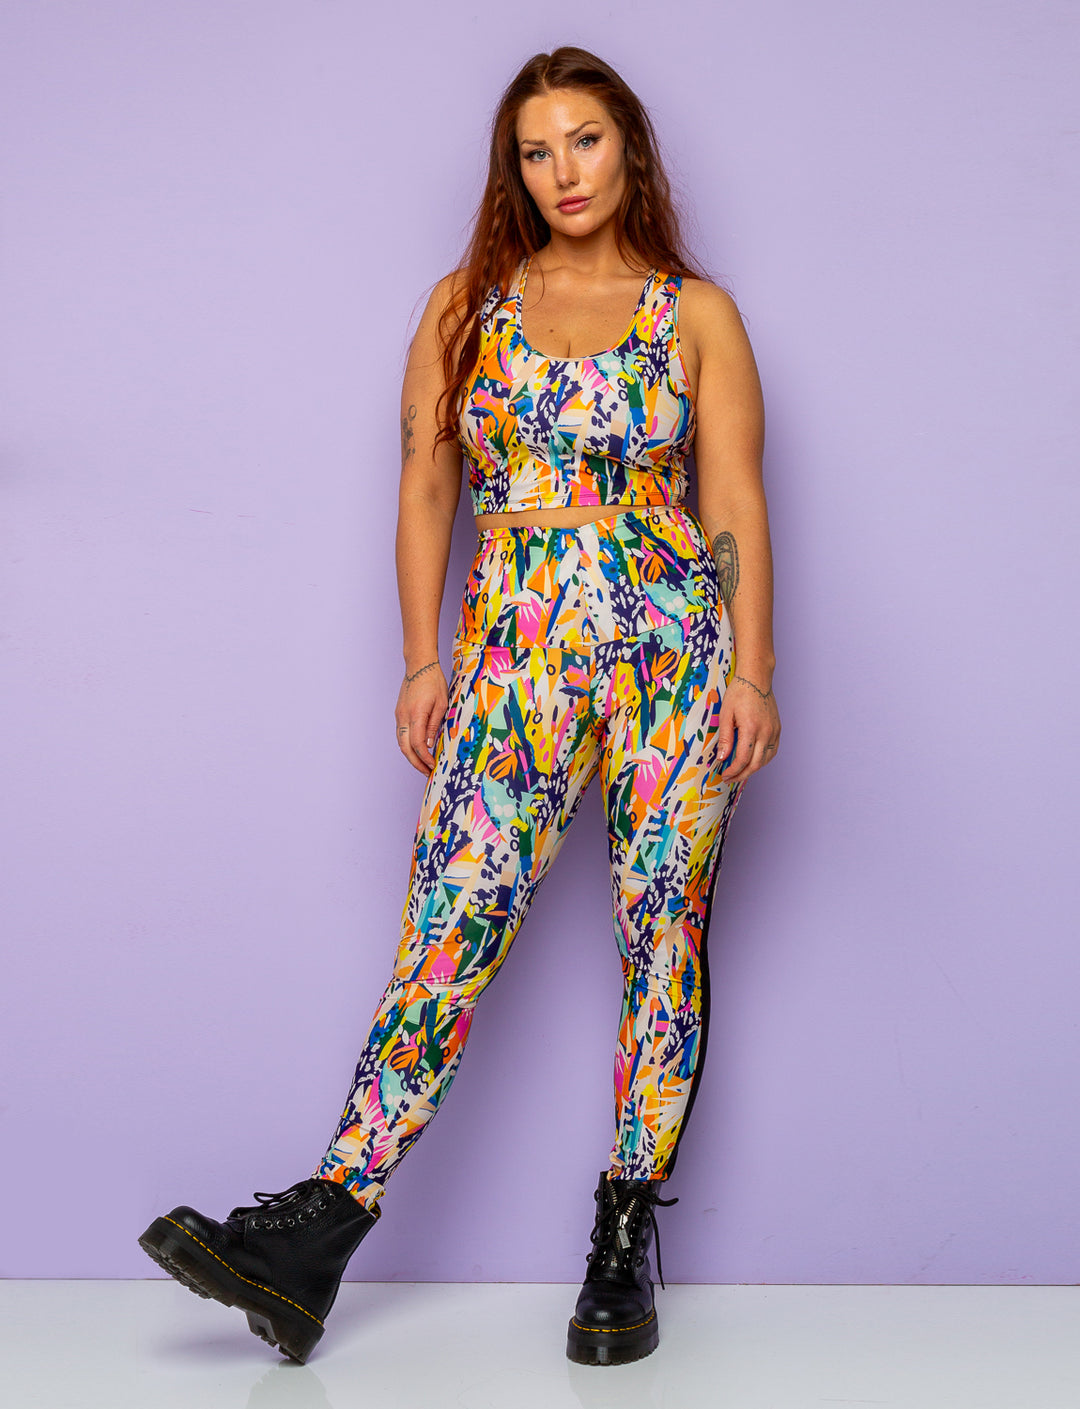 Woman with plaits in her hair modelling printed leggings with matching crop top.